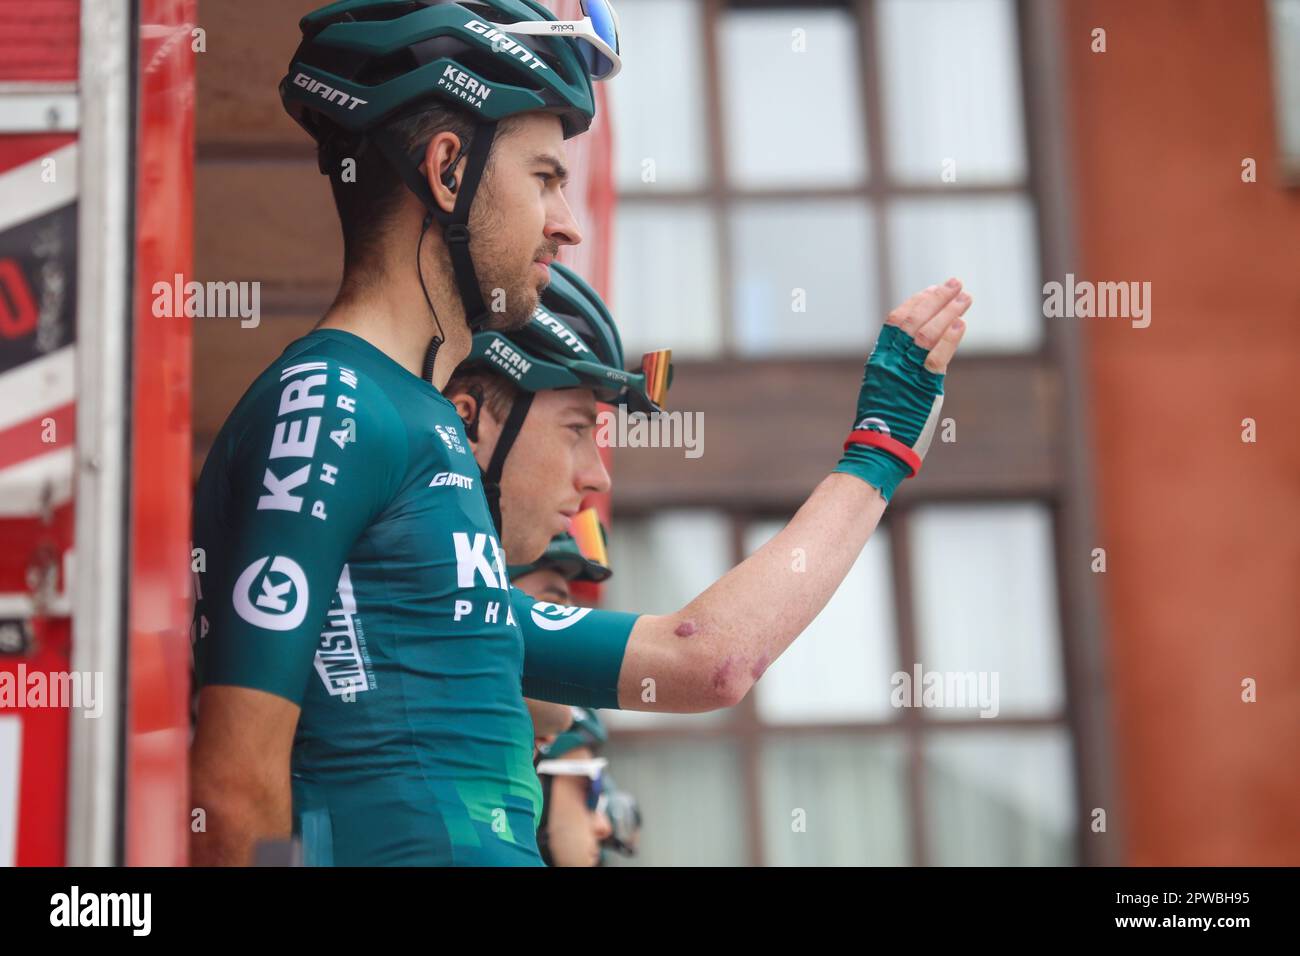 Candas, Spain, 29th April, 2023: Kern Pharma Team rider Roger Adria (R) waves as Hector Carretero looks on at the presentation during the 2nd stage of the Vuelta a Asturias 2023 between Candas and Cangas del Narcea, on April 29 2023, in Candas, Spain. Credit: Alberto Brevers / Alamy Live News Stock Photo